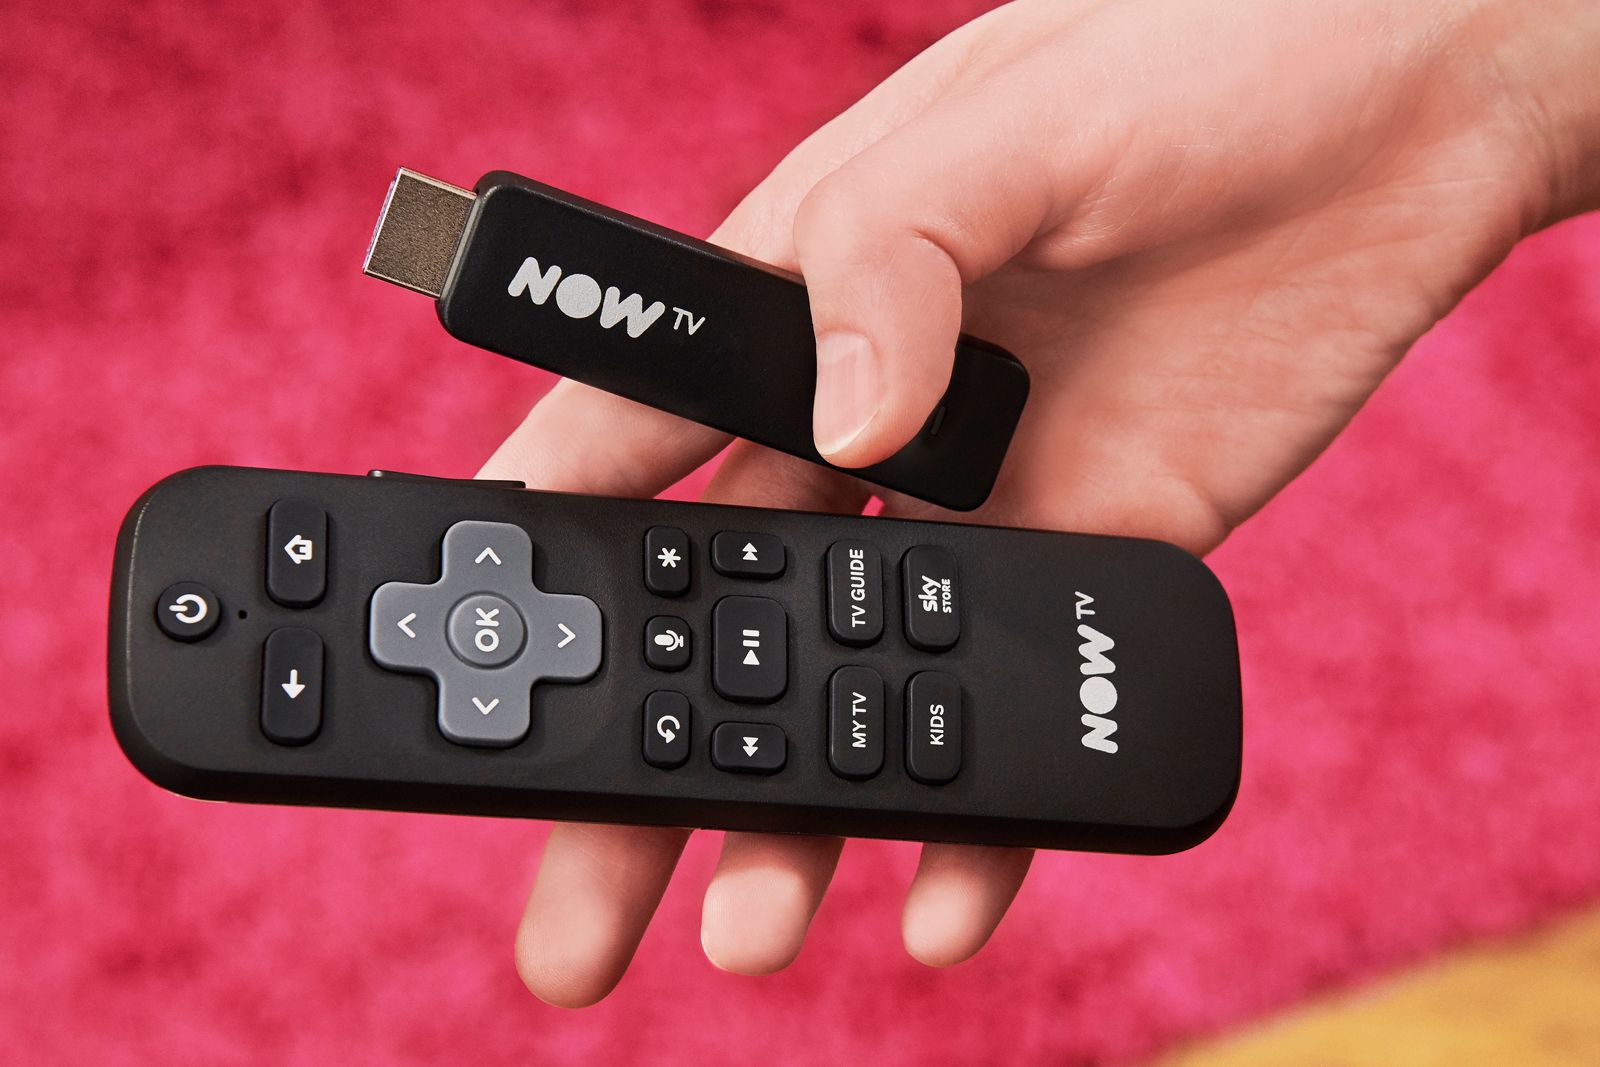 Now TV’s £15 Smart Stick is the easiest way to get Sky channels at home image 1